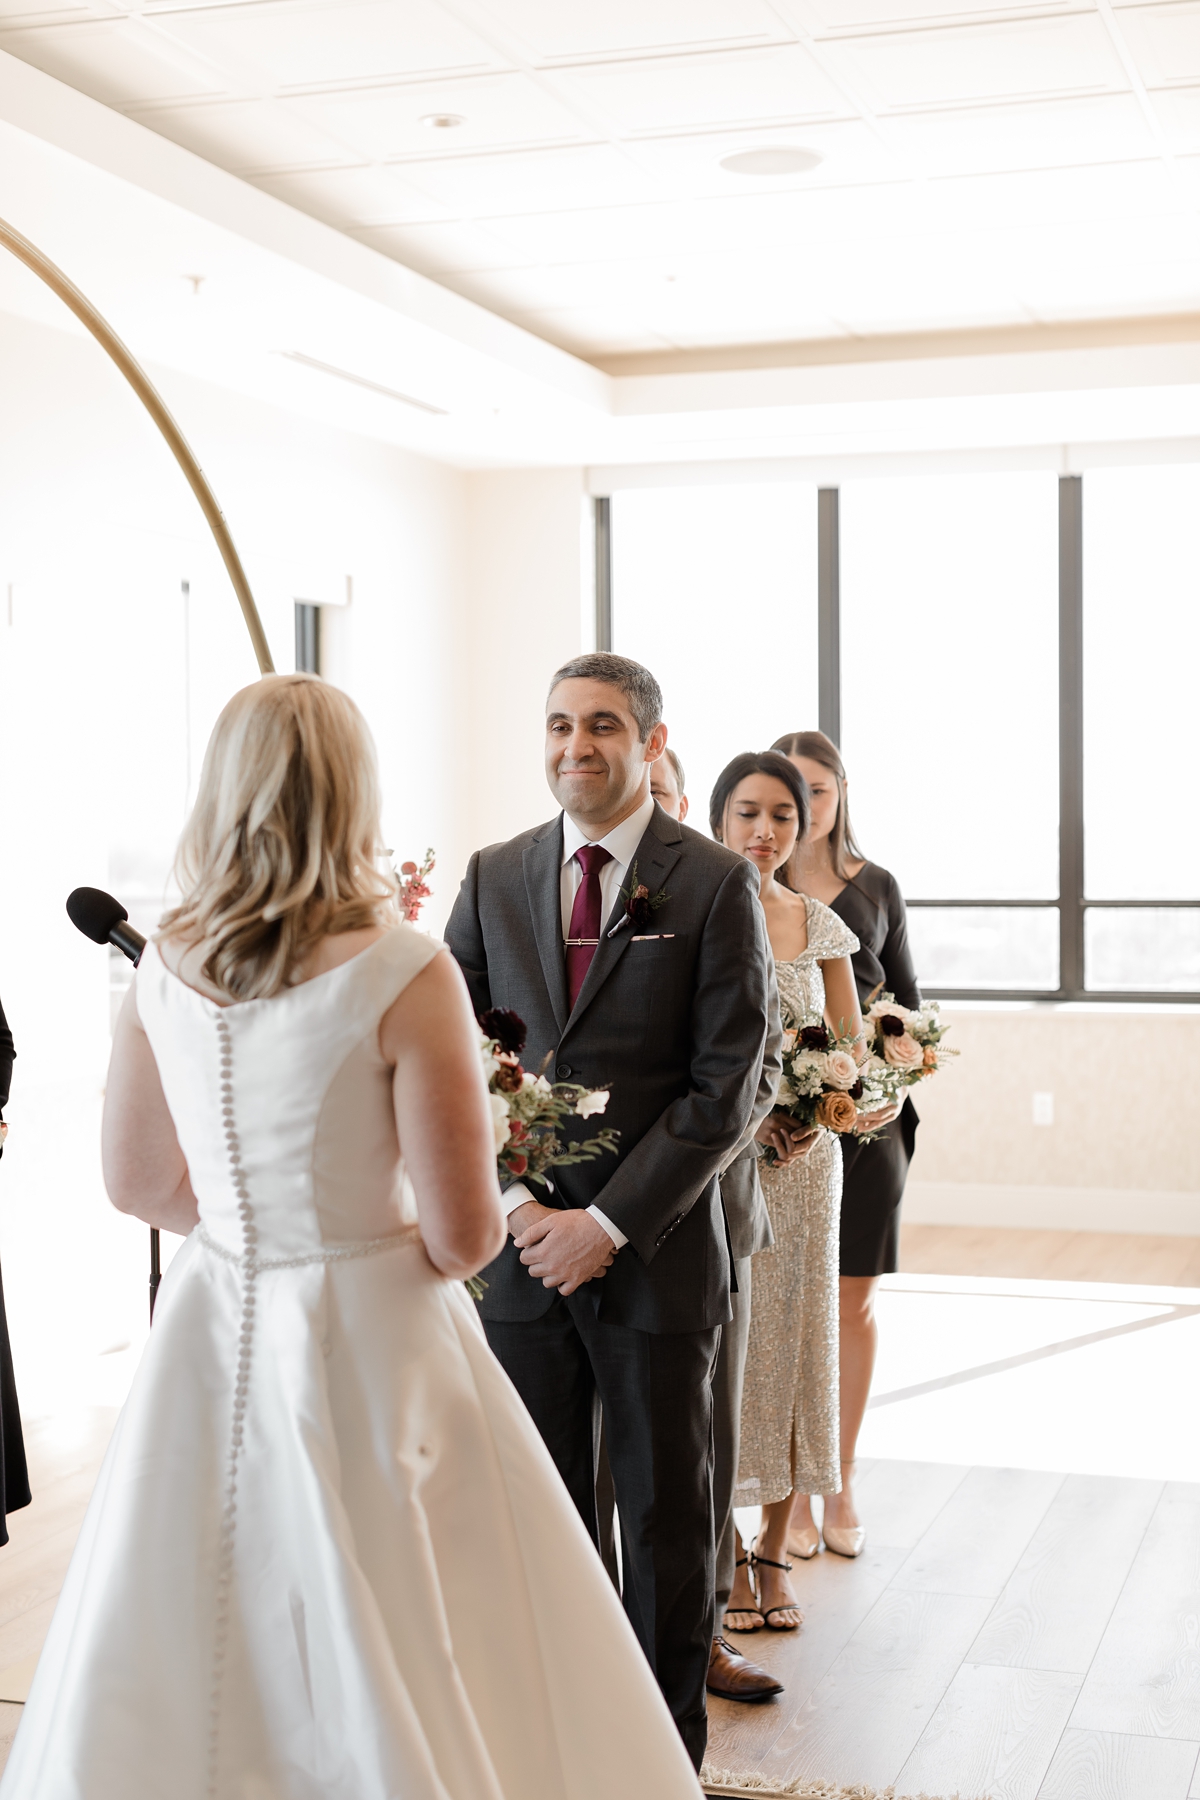 Groom smiling at bride during vows